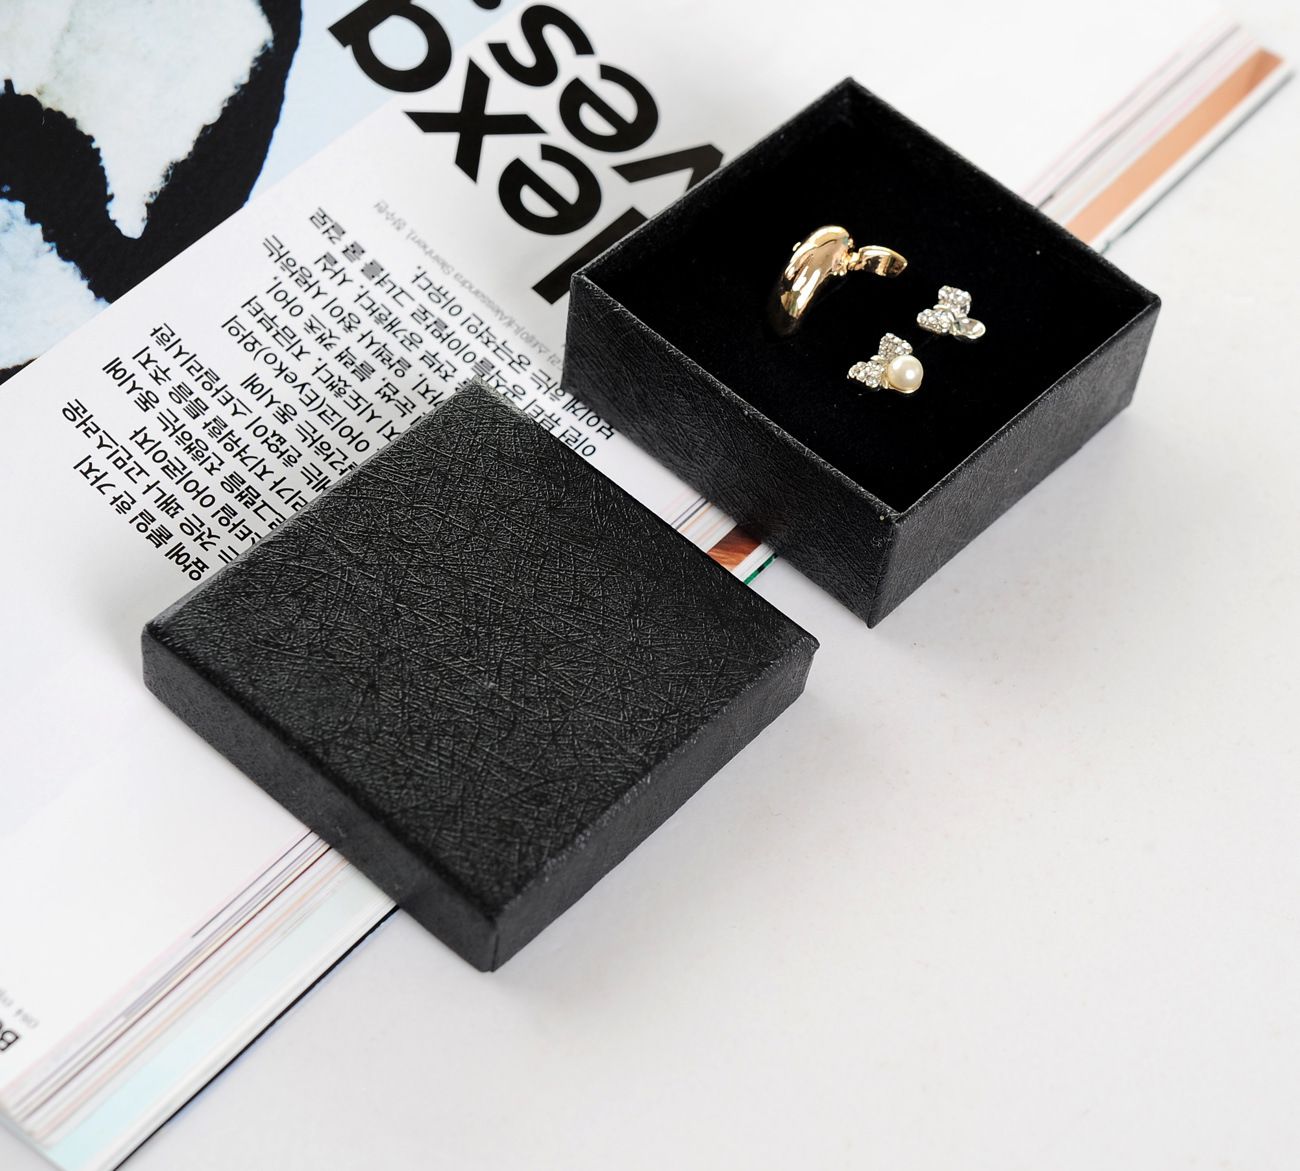 [Simple Seven]6.3*6.3*2.3cm Classic Black Jewelry Ring Box, Specialty Paper Bracelet Carrying box, Festival Pendant Display with Sponge